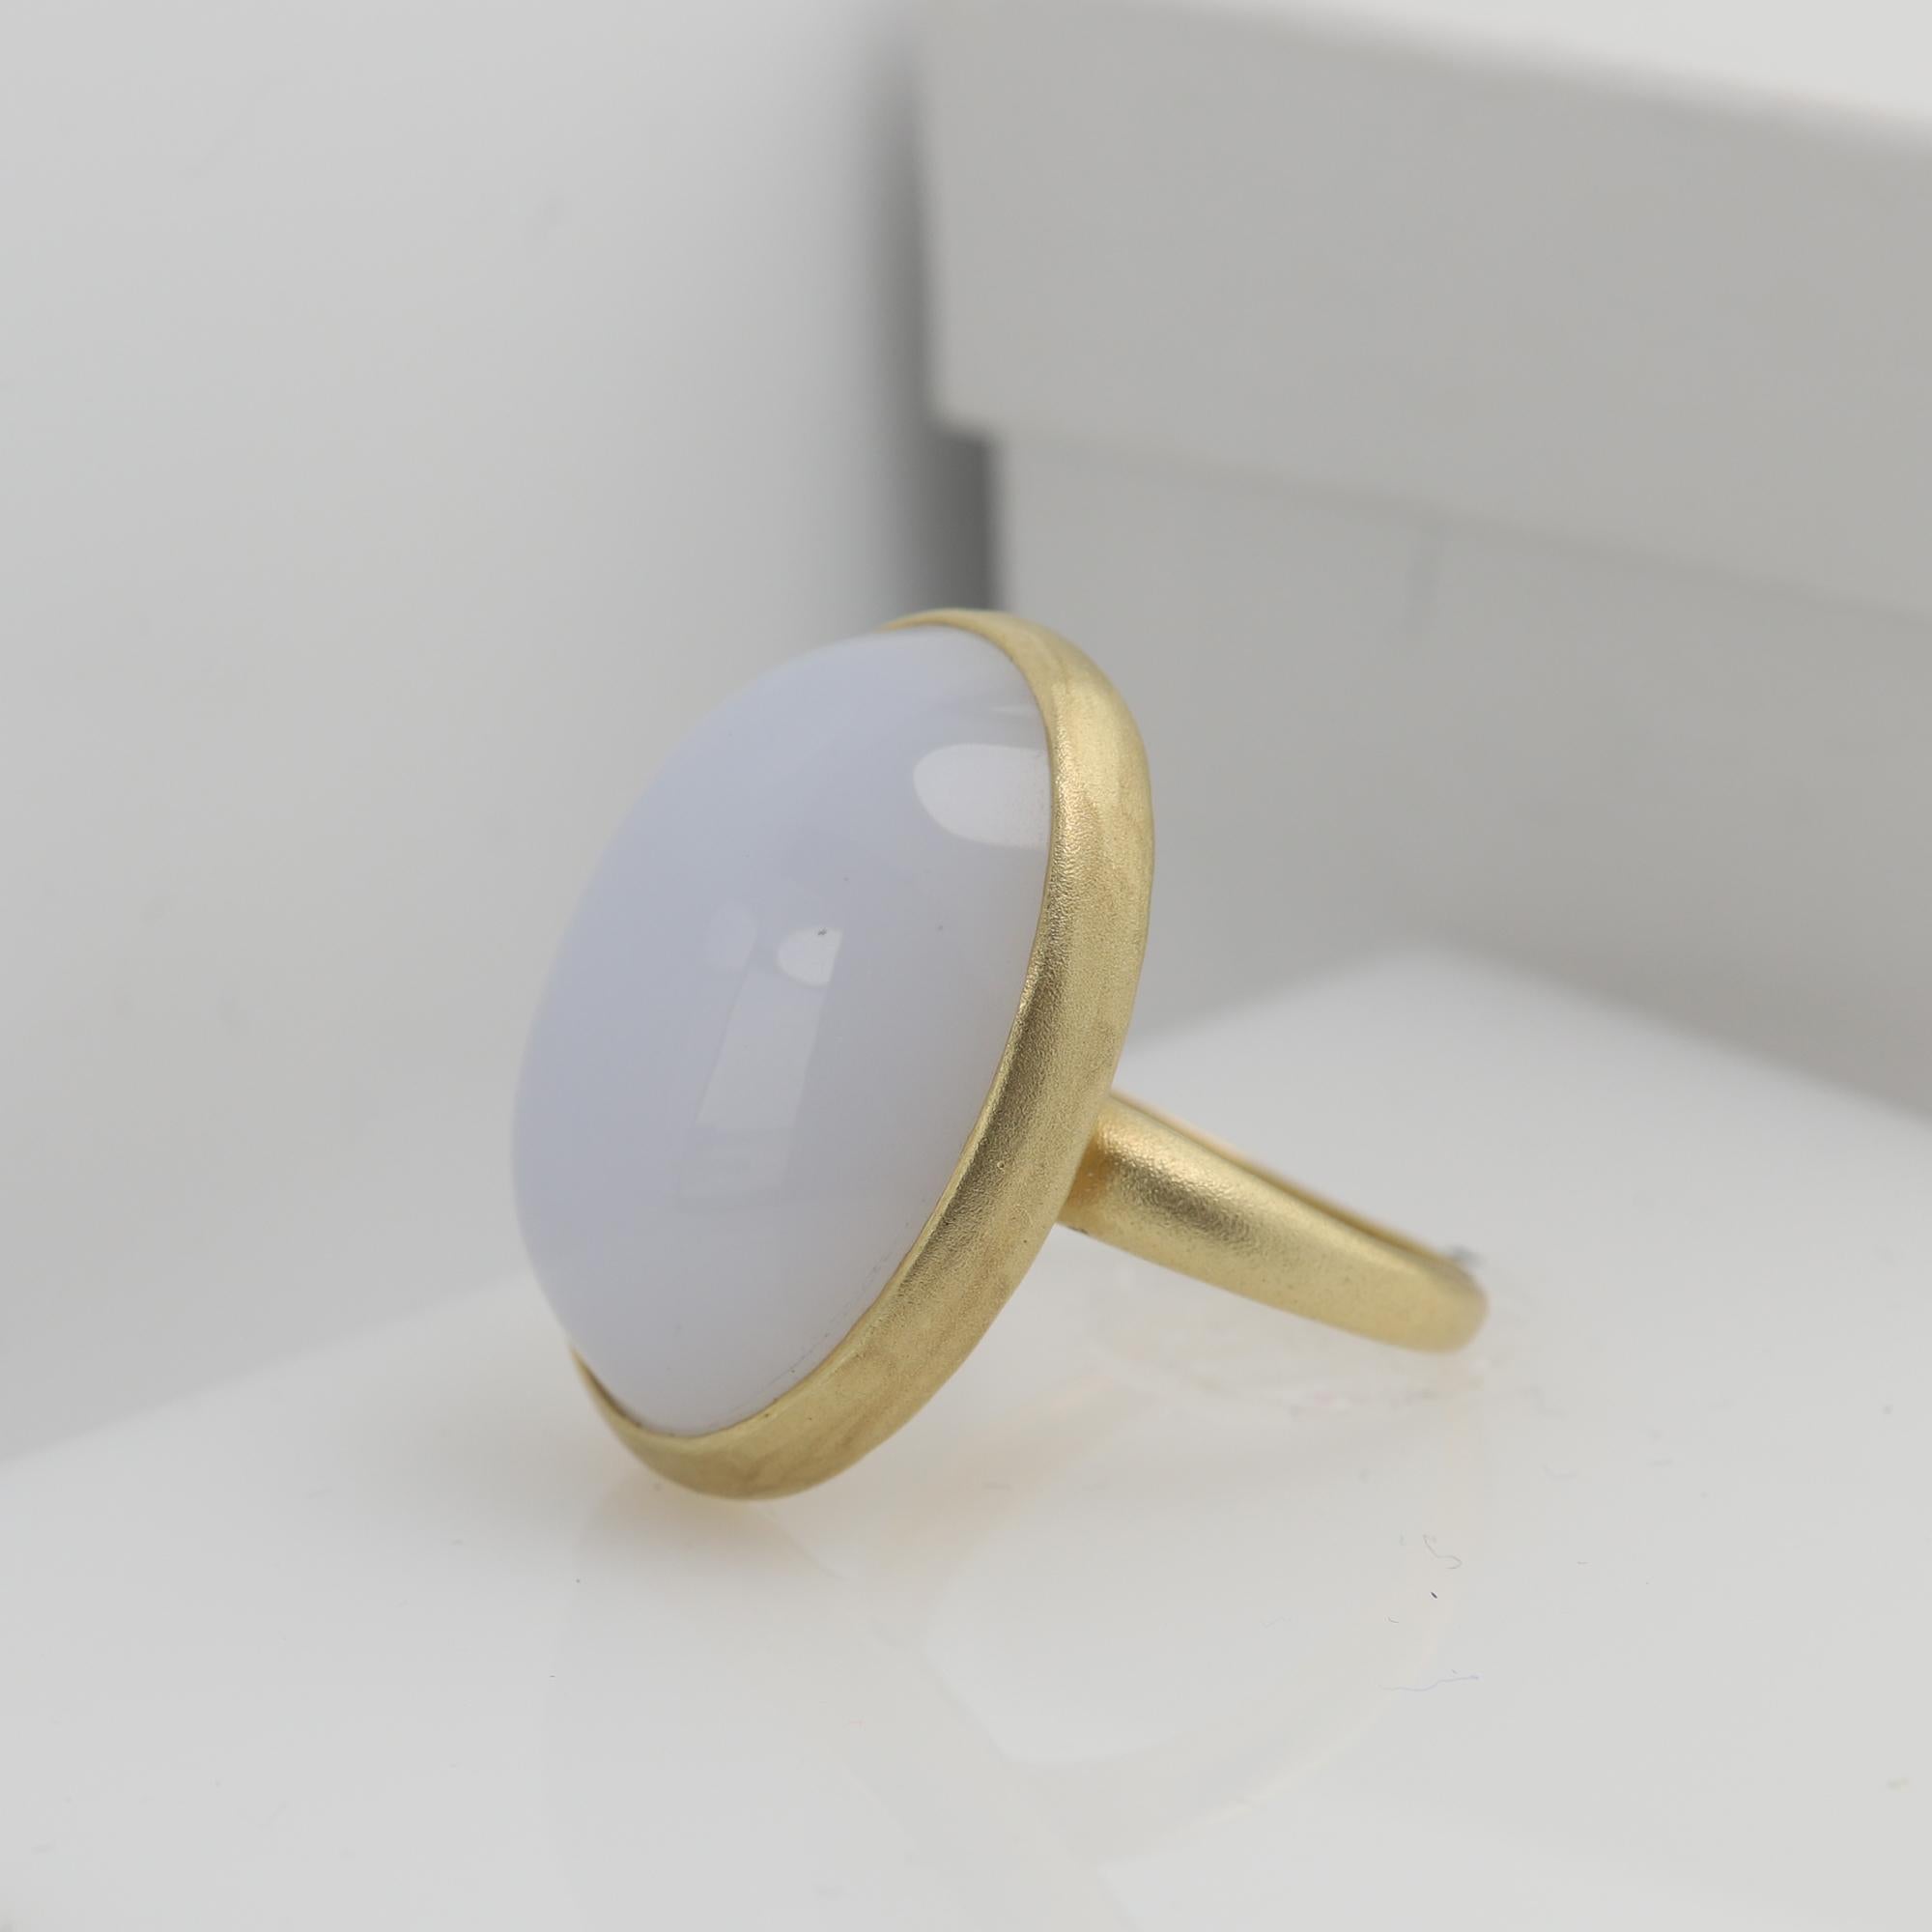 NEW 
Vintage Natural Chalcedony Oval Cabuchon Cocktail  Ring - Hand Made in Italy
14k Yellow Gold 11 grams - mat finish (not shiney gold)
Cabochon Oval shape Dome  approx size 28 x 20 mm / 25 carat
Stone Color- white-ish / Grey
Finger size 7.5
stone